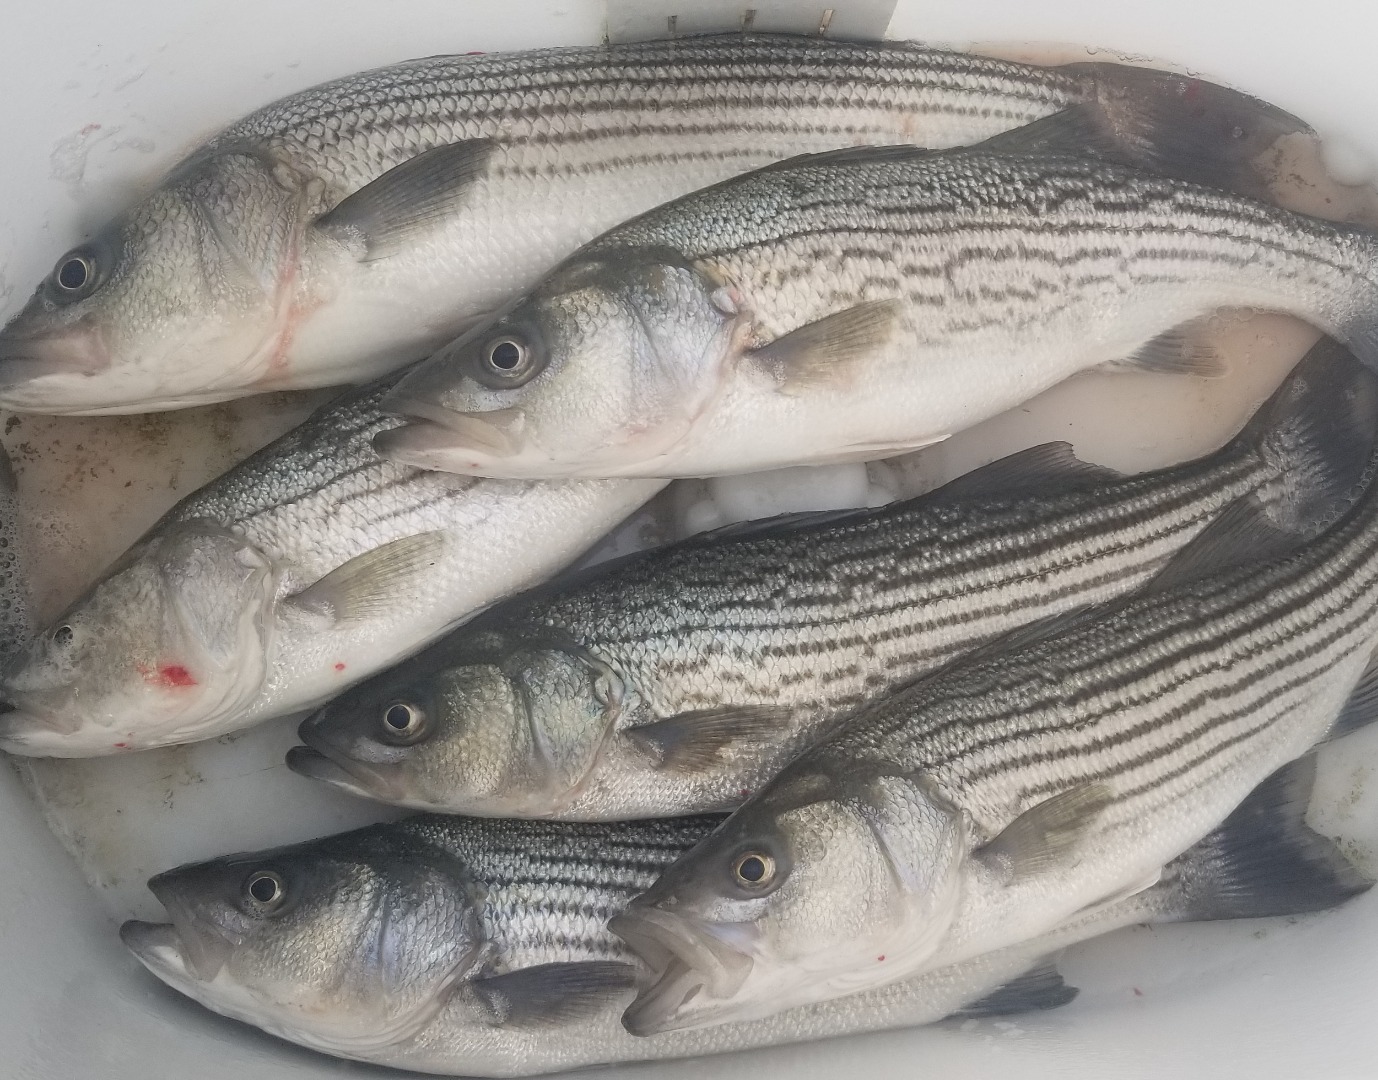 Delta stripers picking up